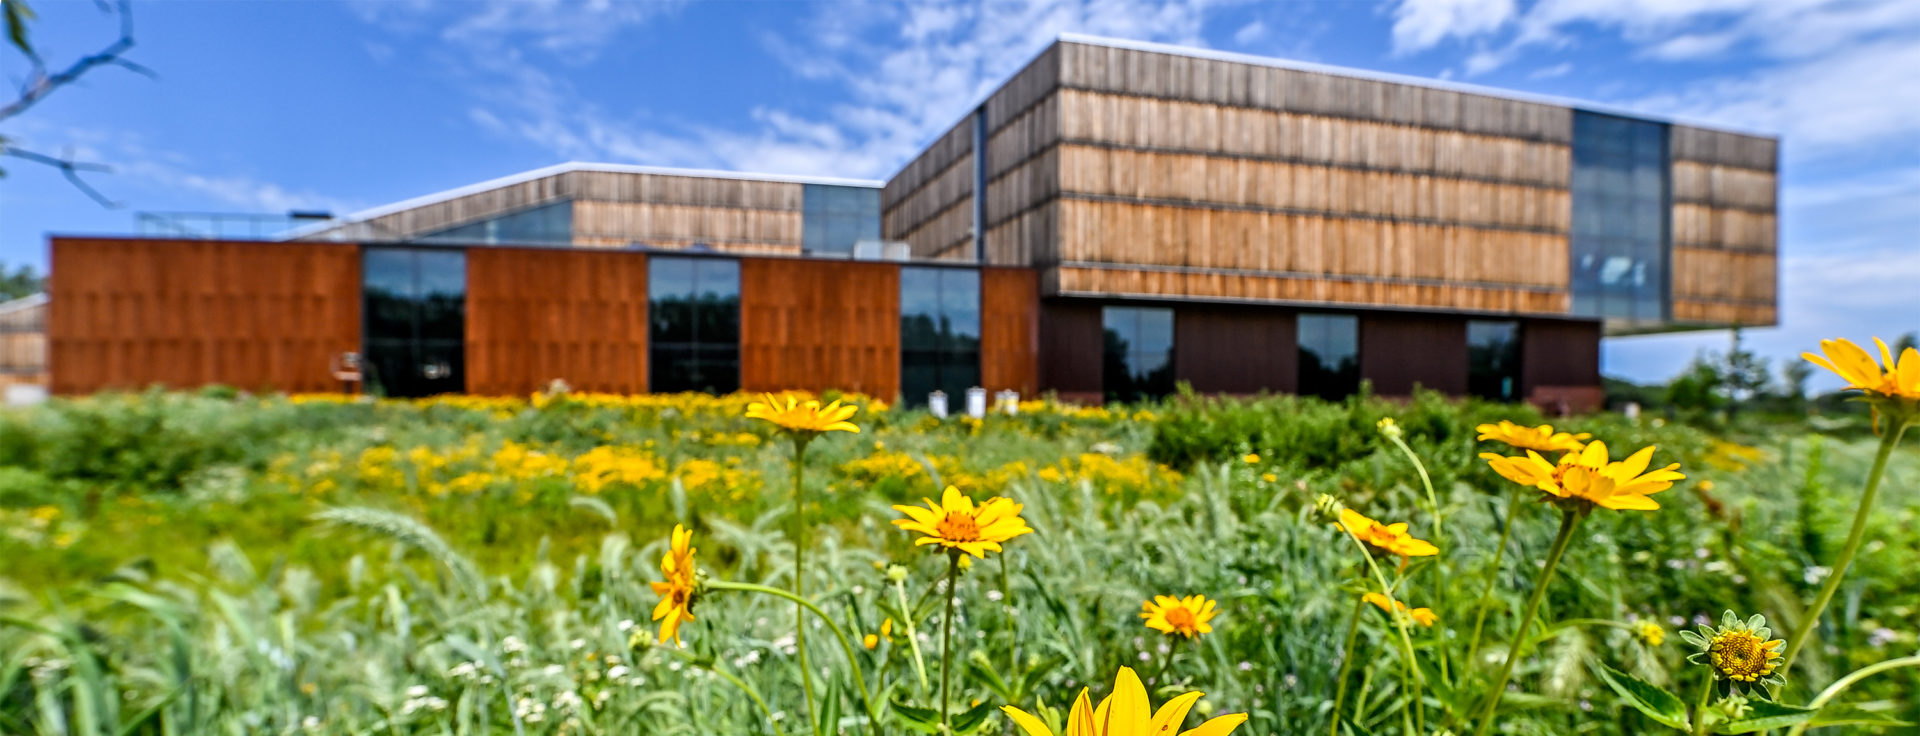 flowers in front of the learning landscape